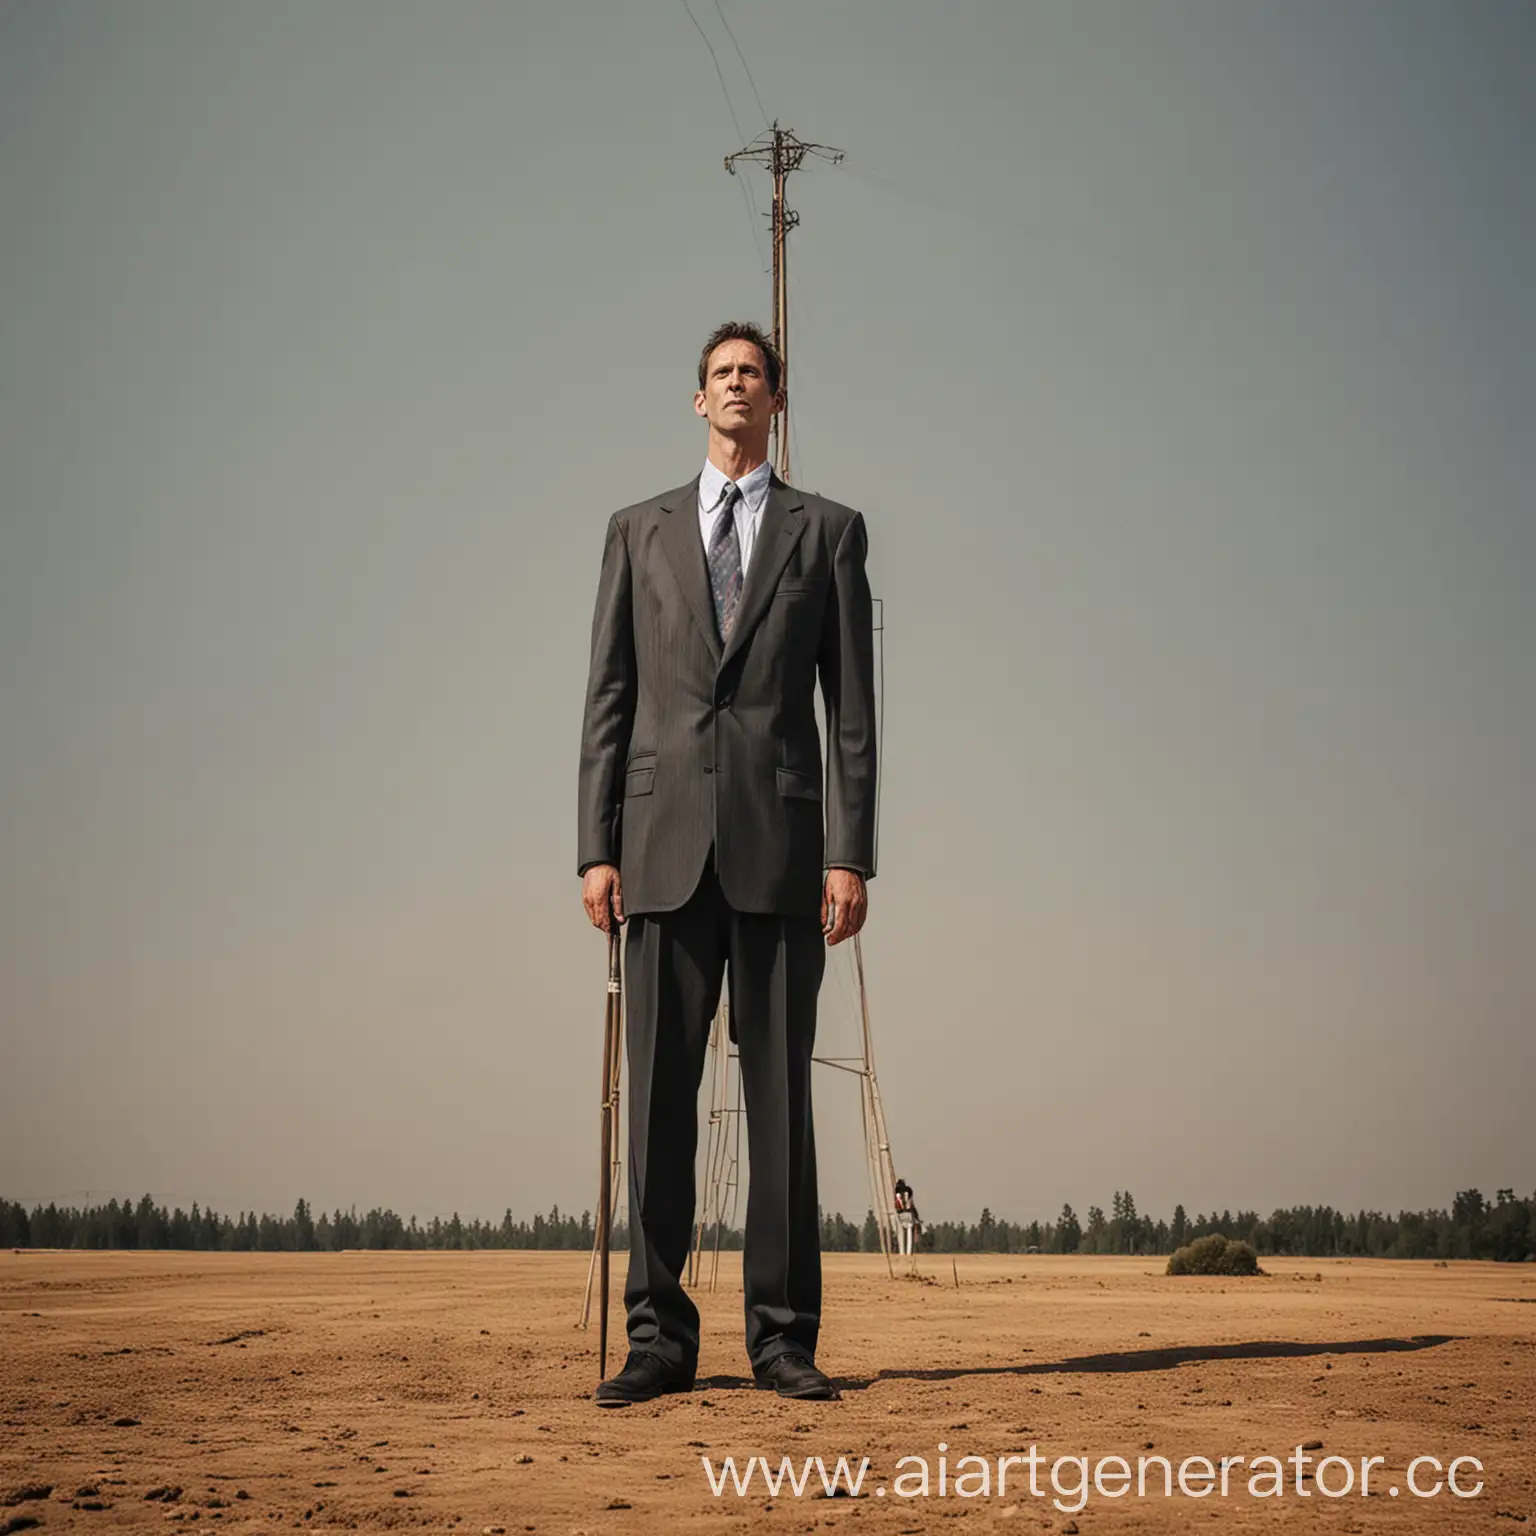 Tallest-Man-in-the-World-Standing-Outdoors